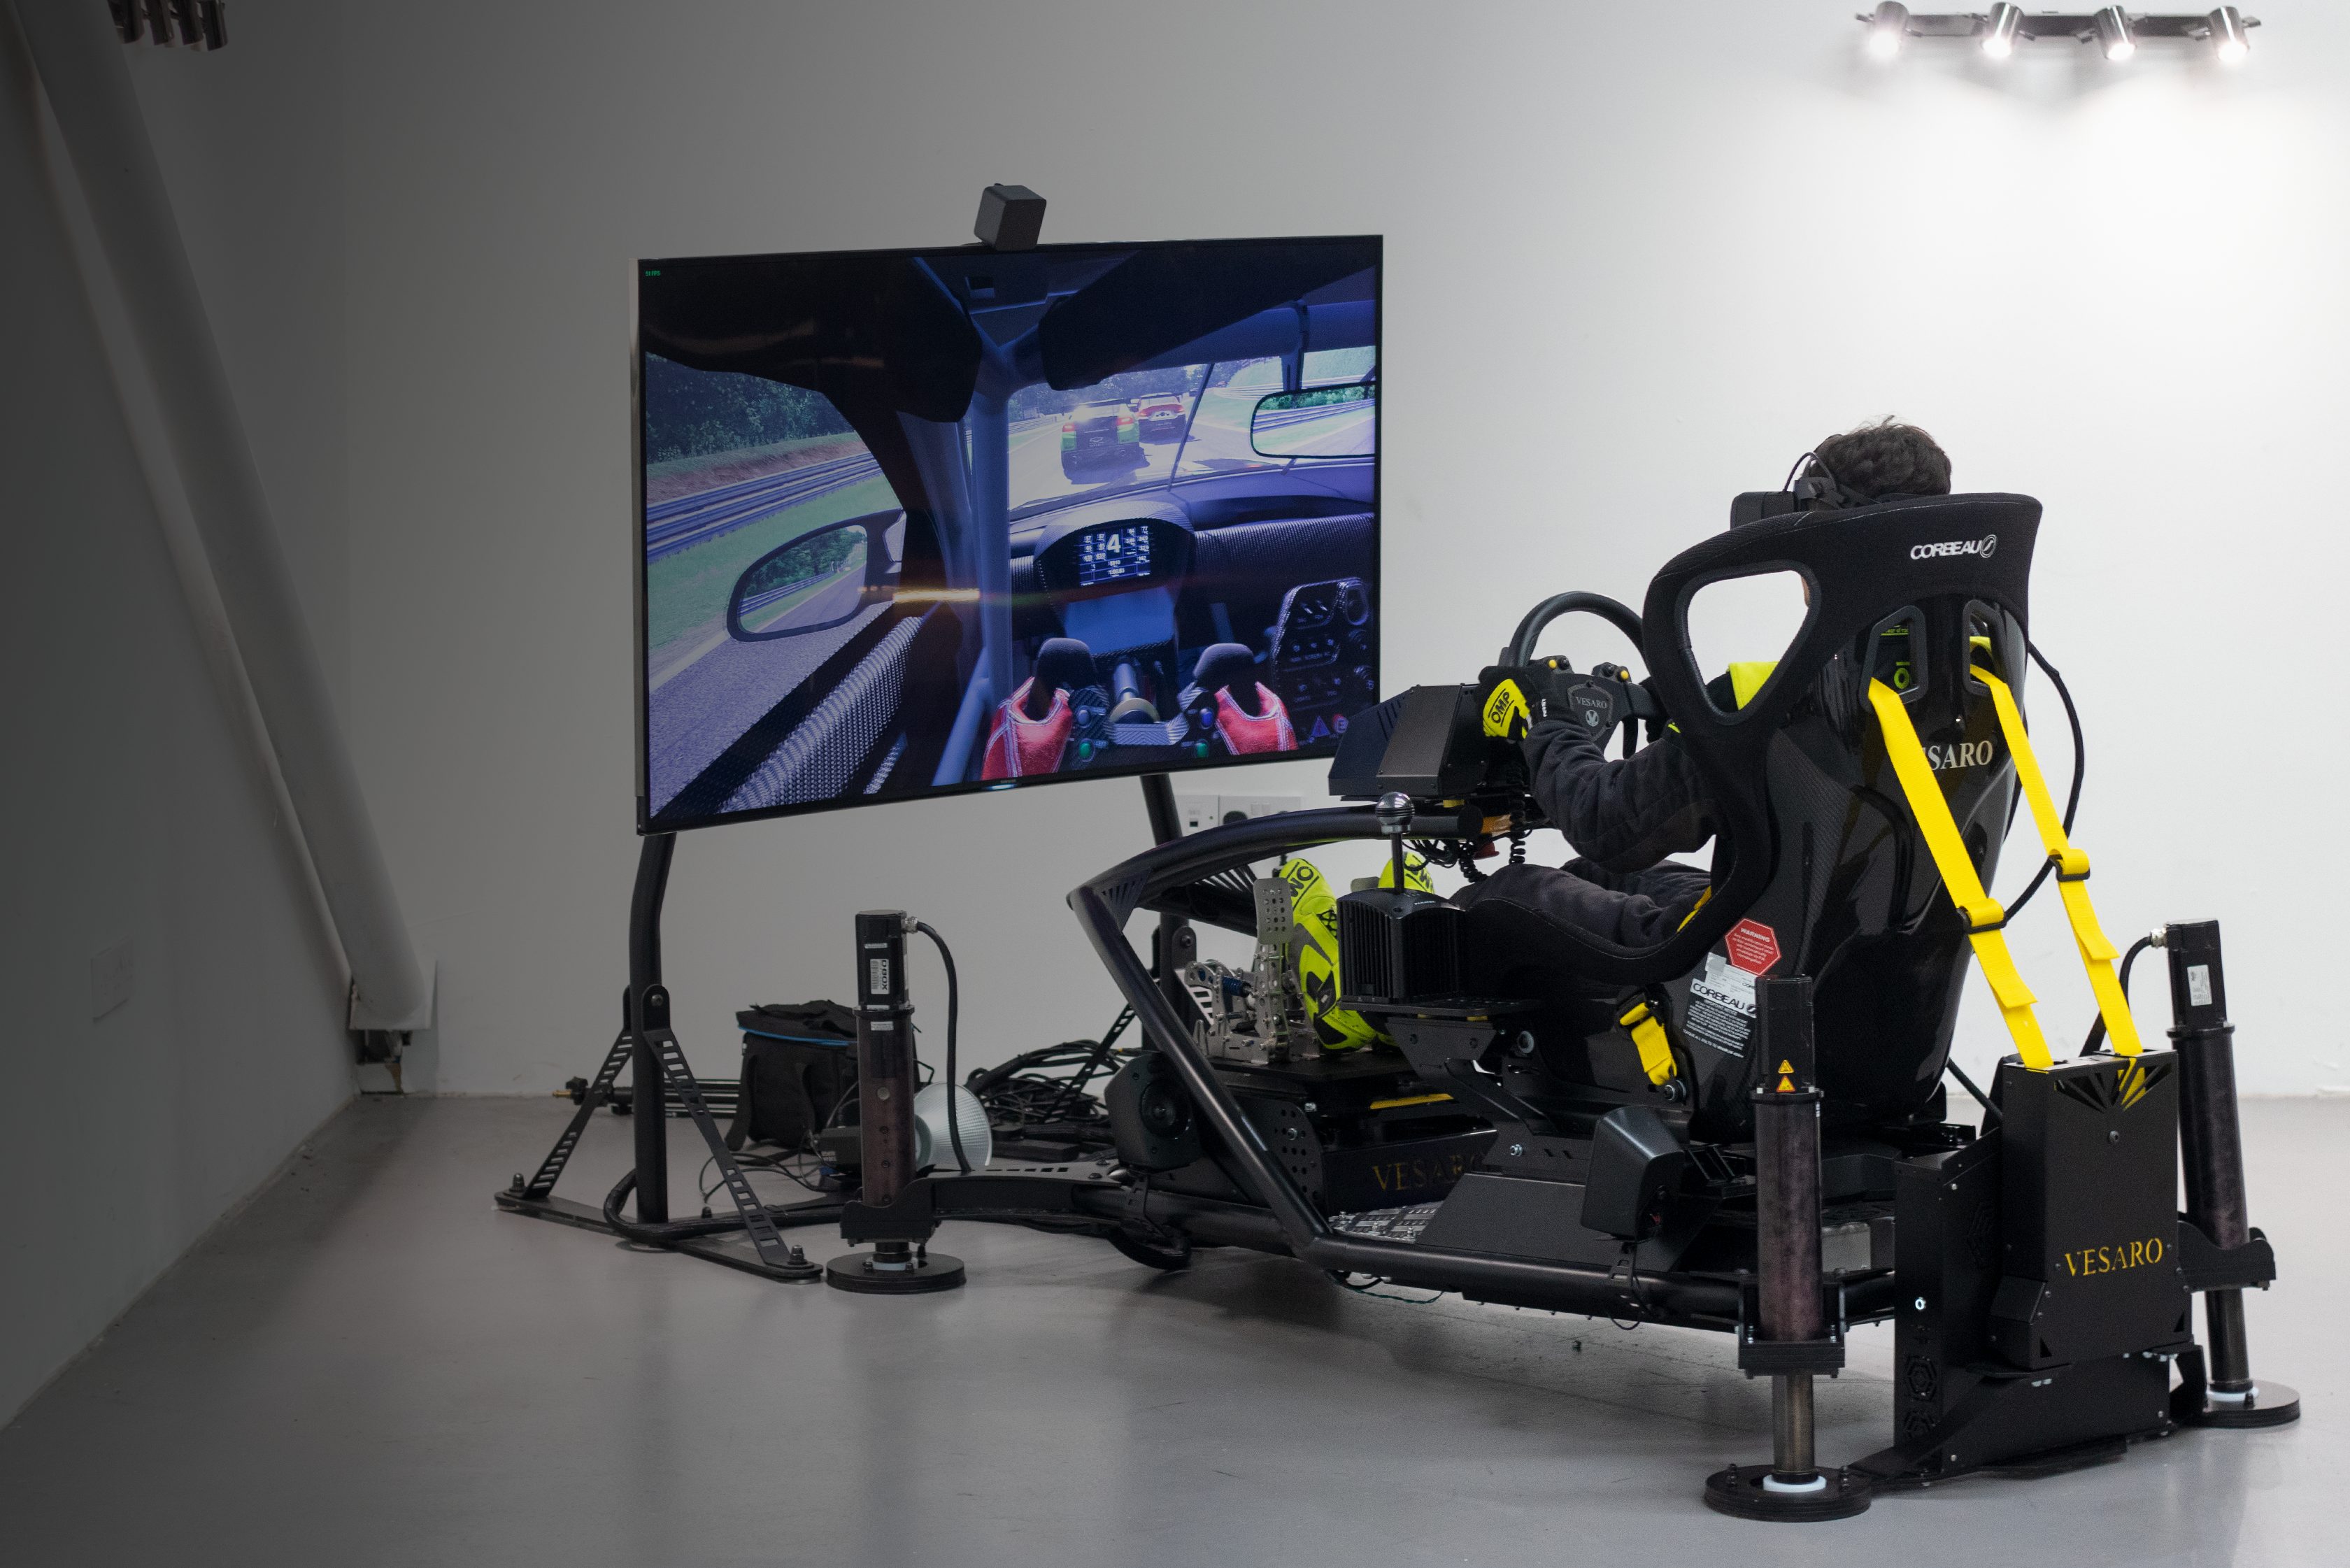 Sim racing rig with integrated VR headset